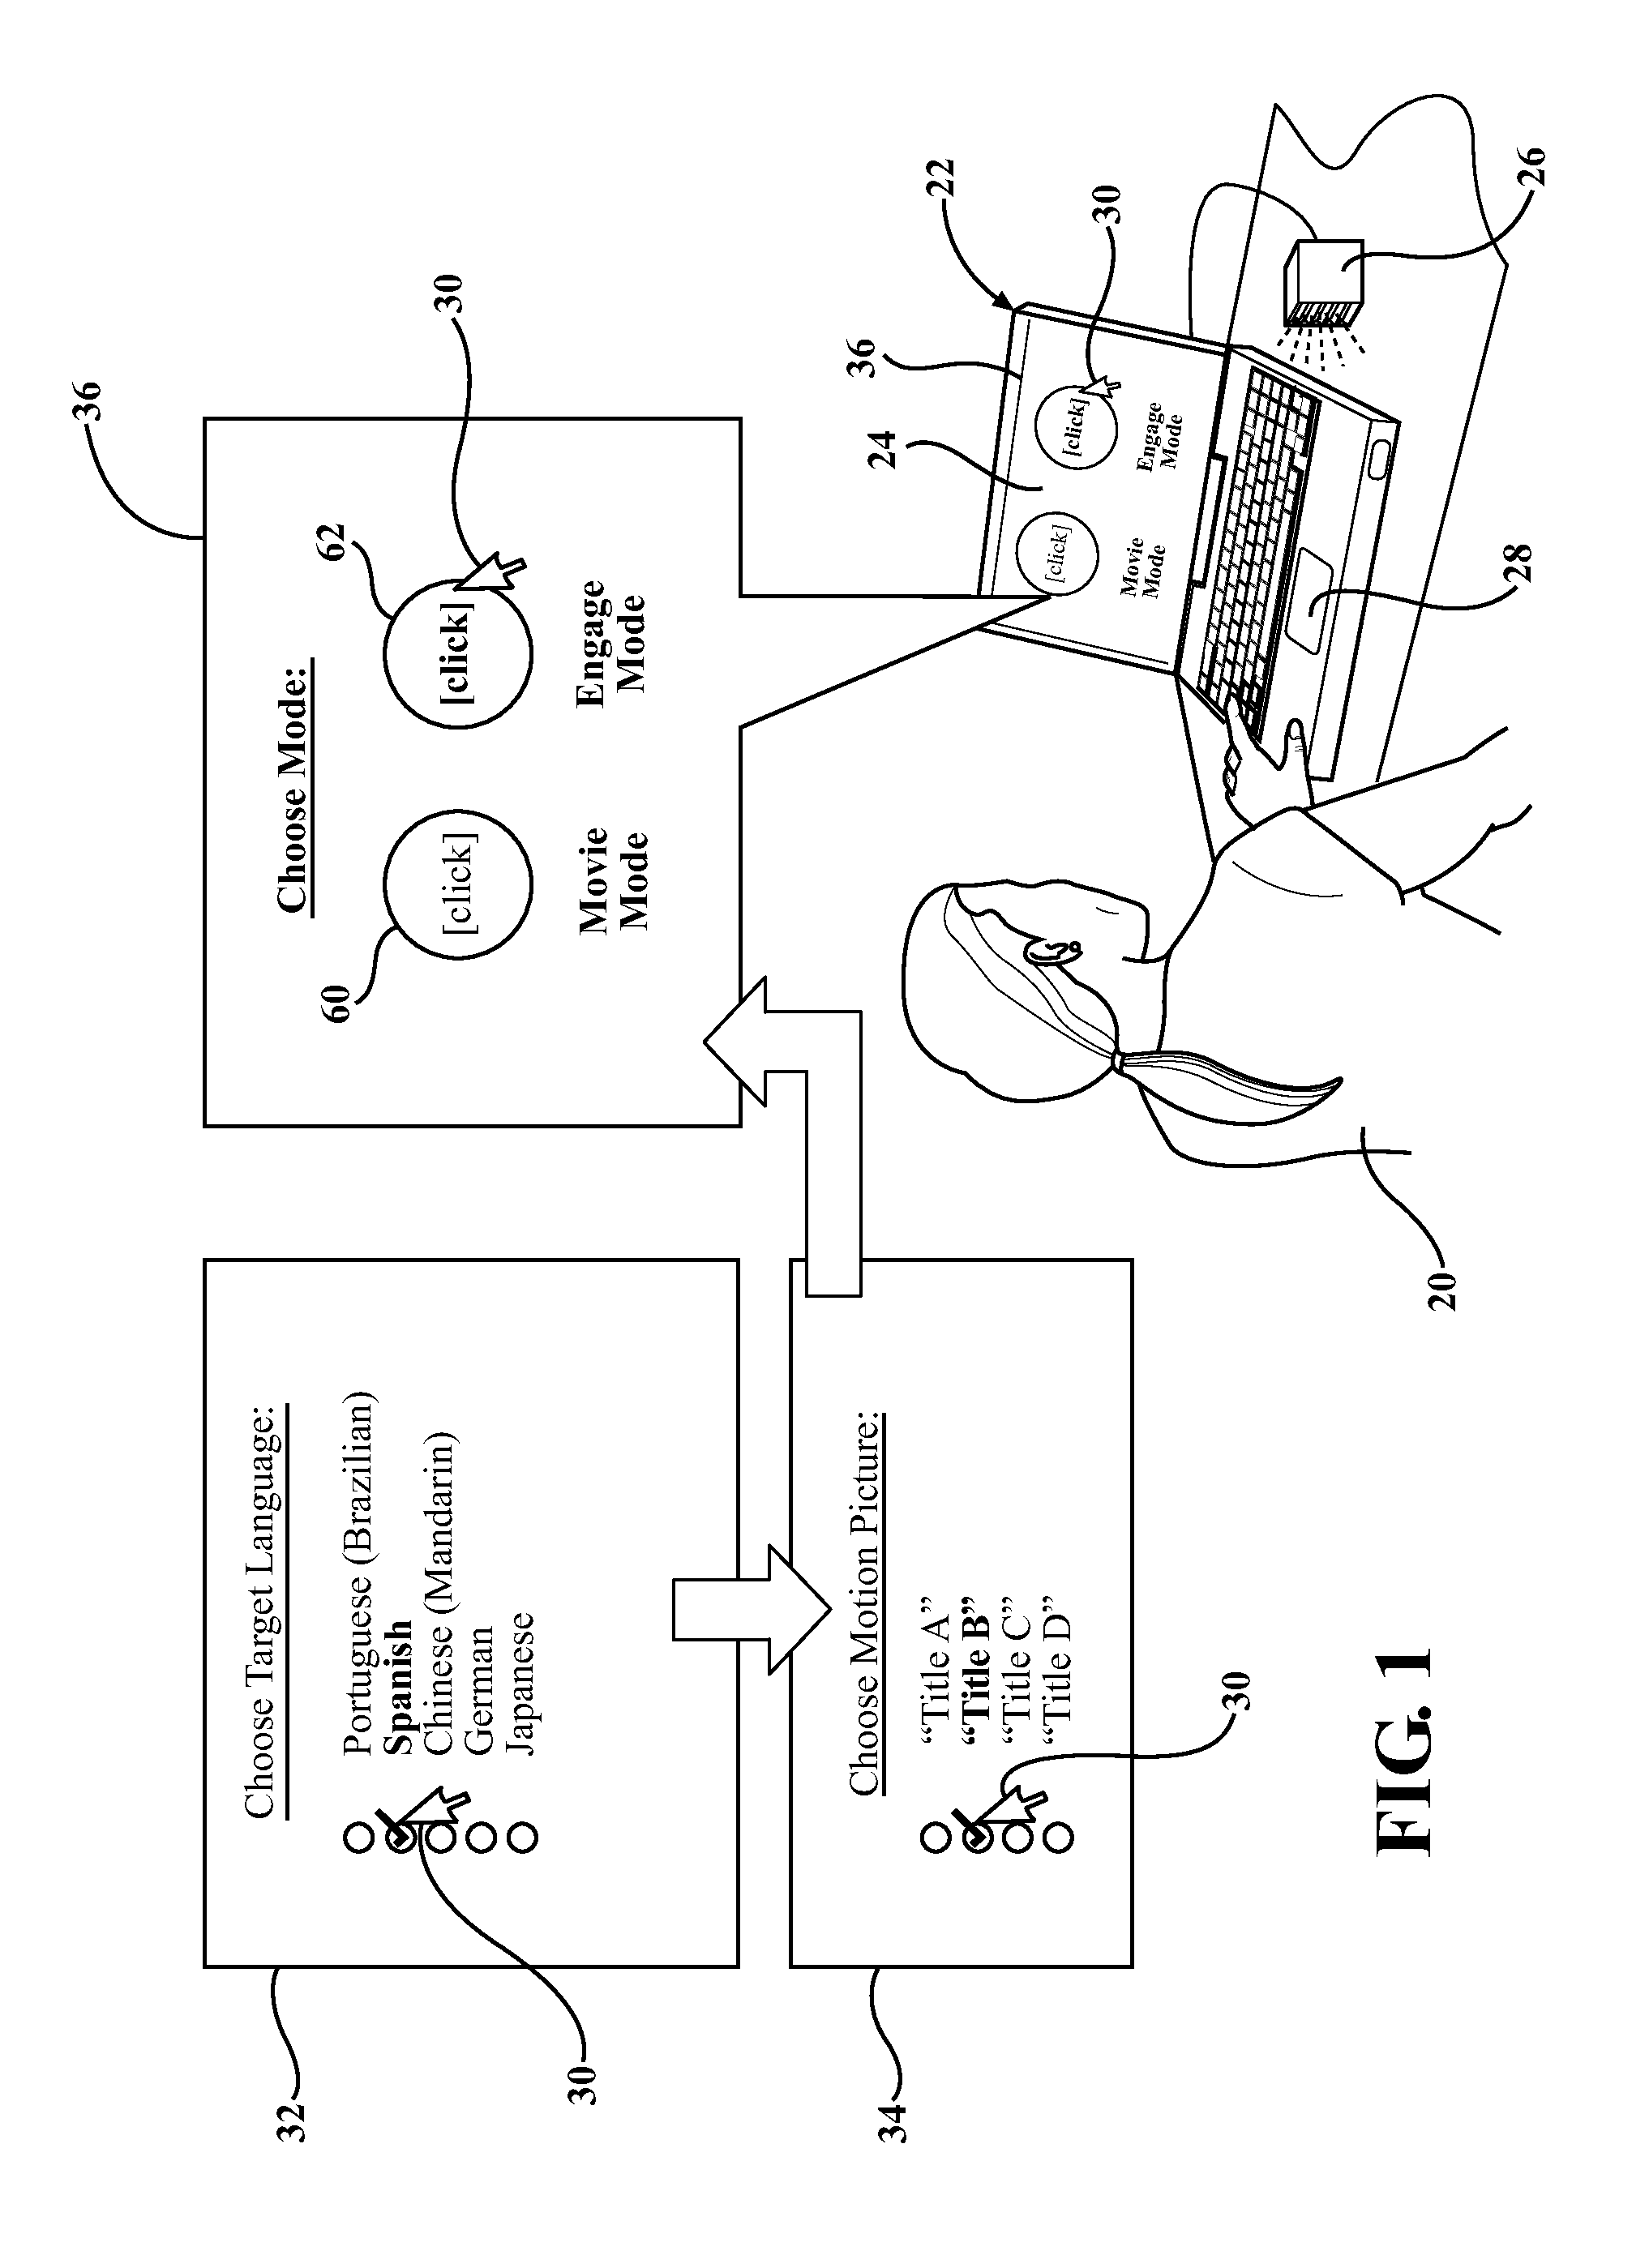 System and method for language learning through film